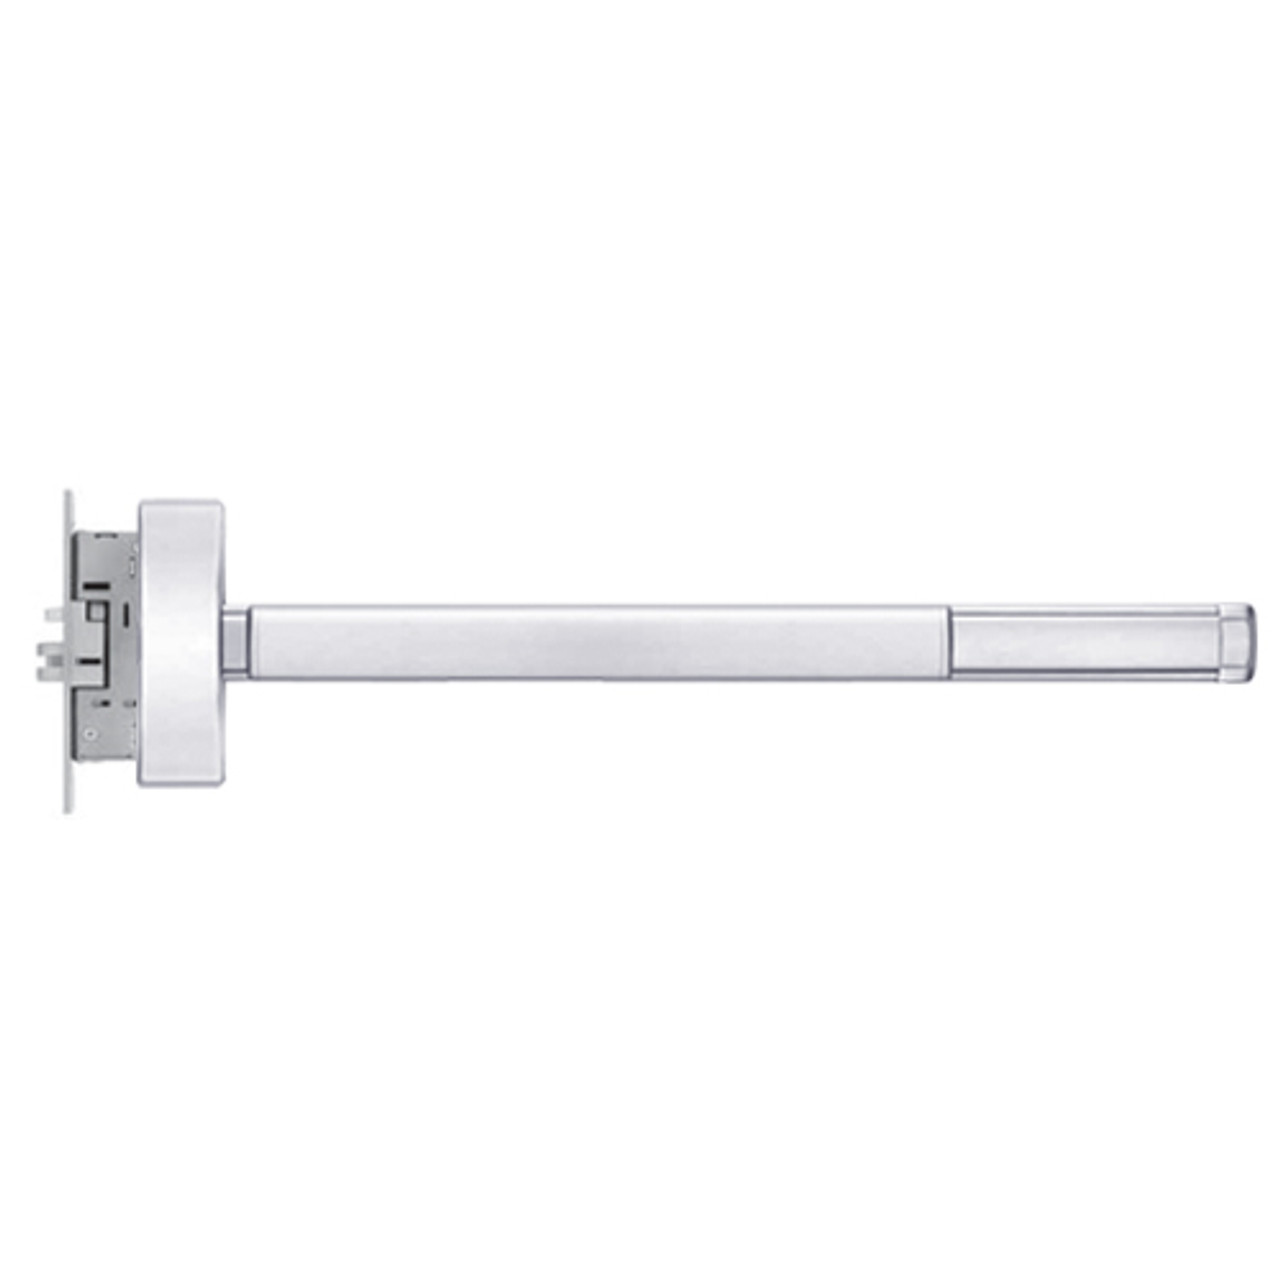 ELRFL2315-LHR-625-48 PHI 2300 Series Fire Rated Apex Mortise Exit Device with Electric Latch Retraction Prepped for Thumb Piece Always Active in Bright Chrome Finish